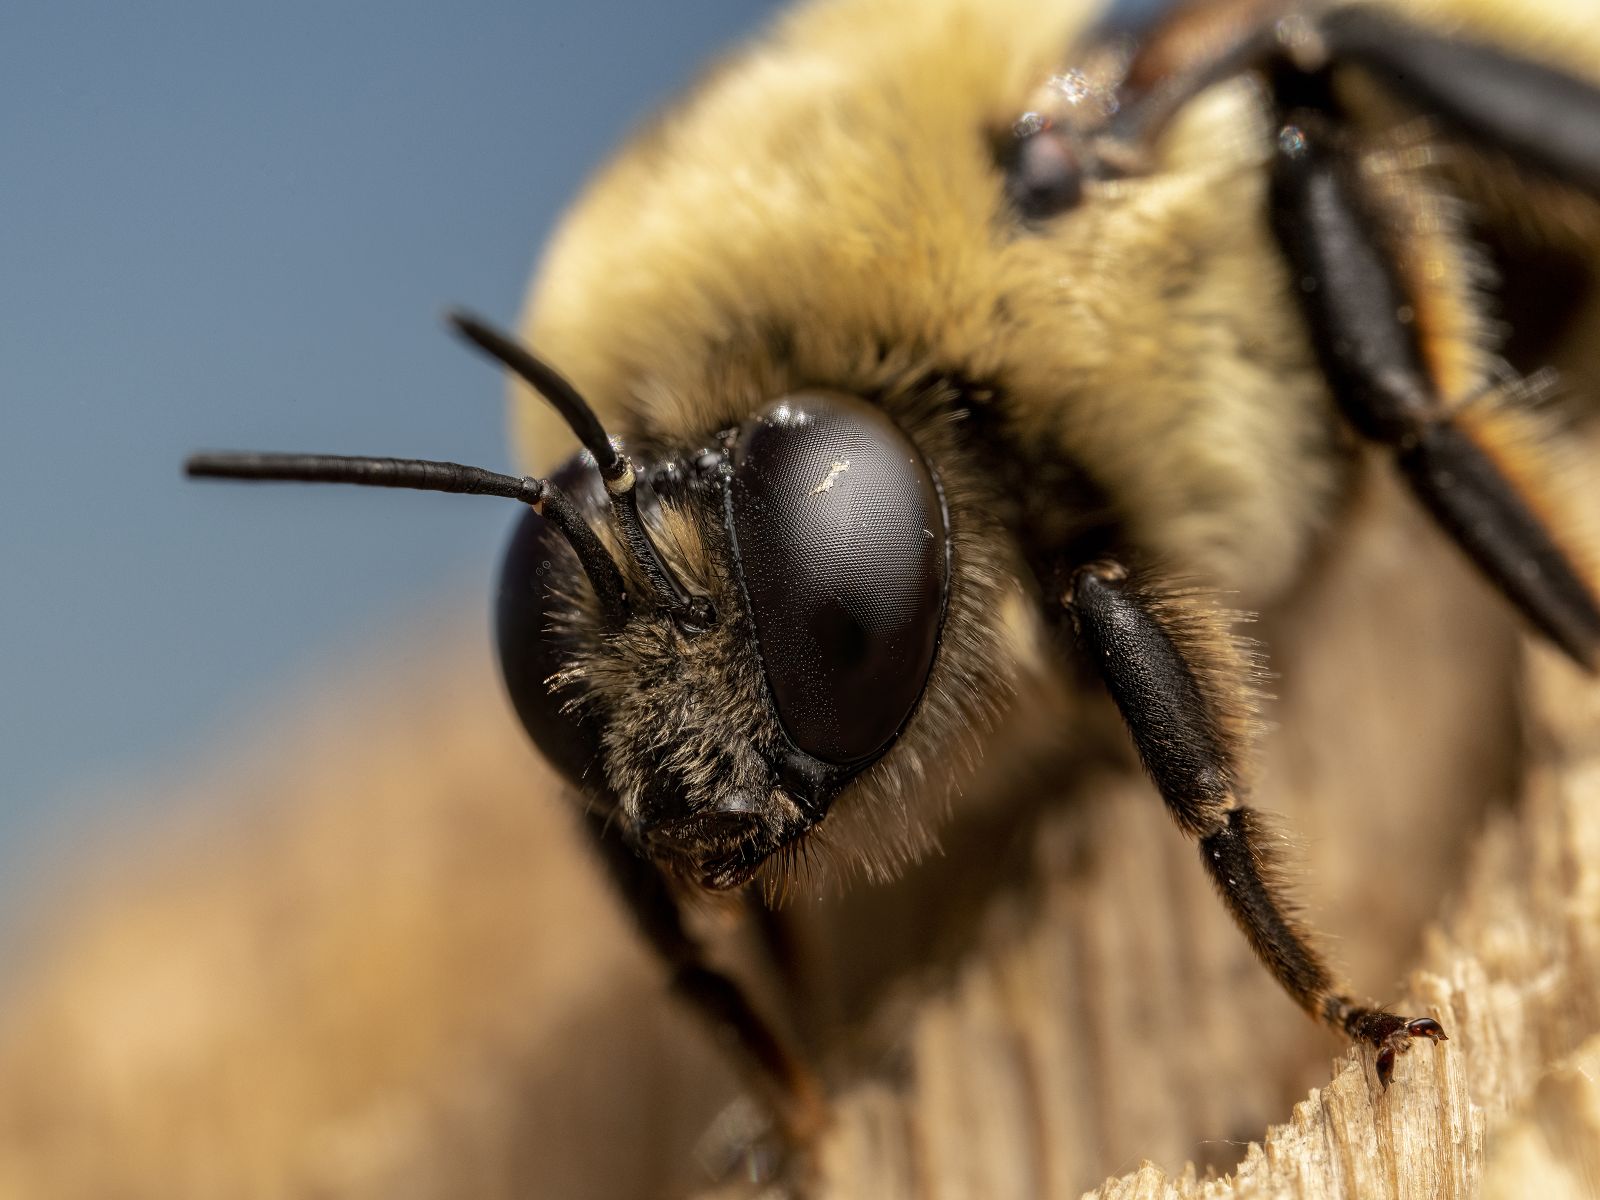 Those adorable, hairy bumblebees are best pollinators